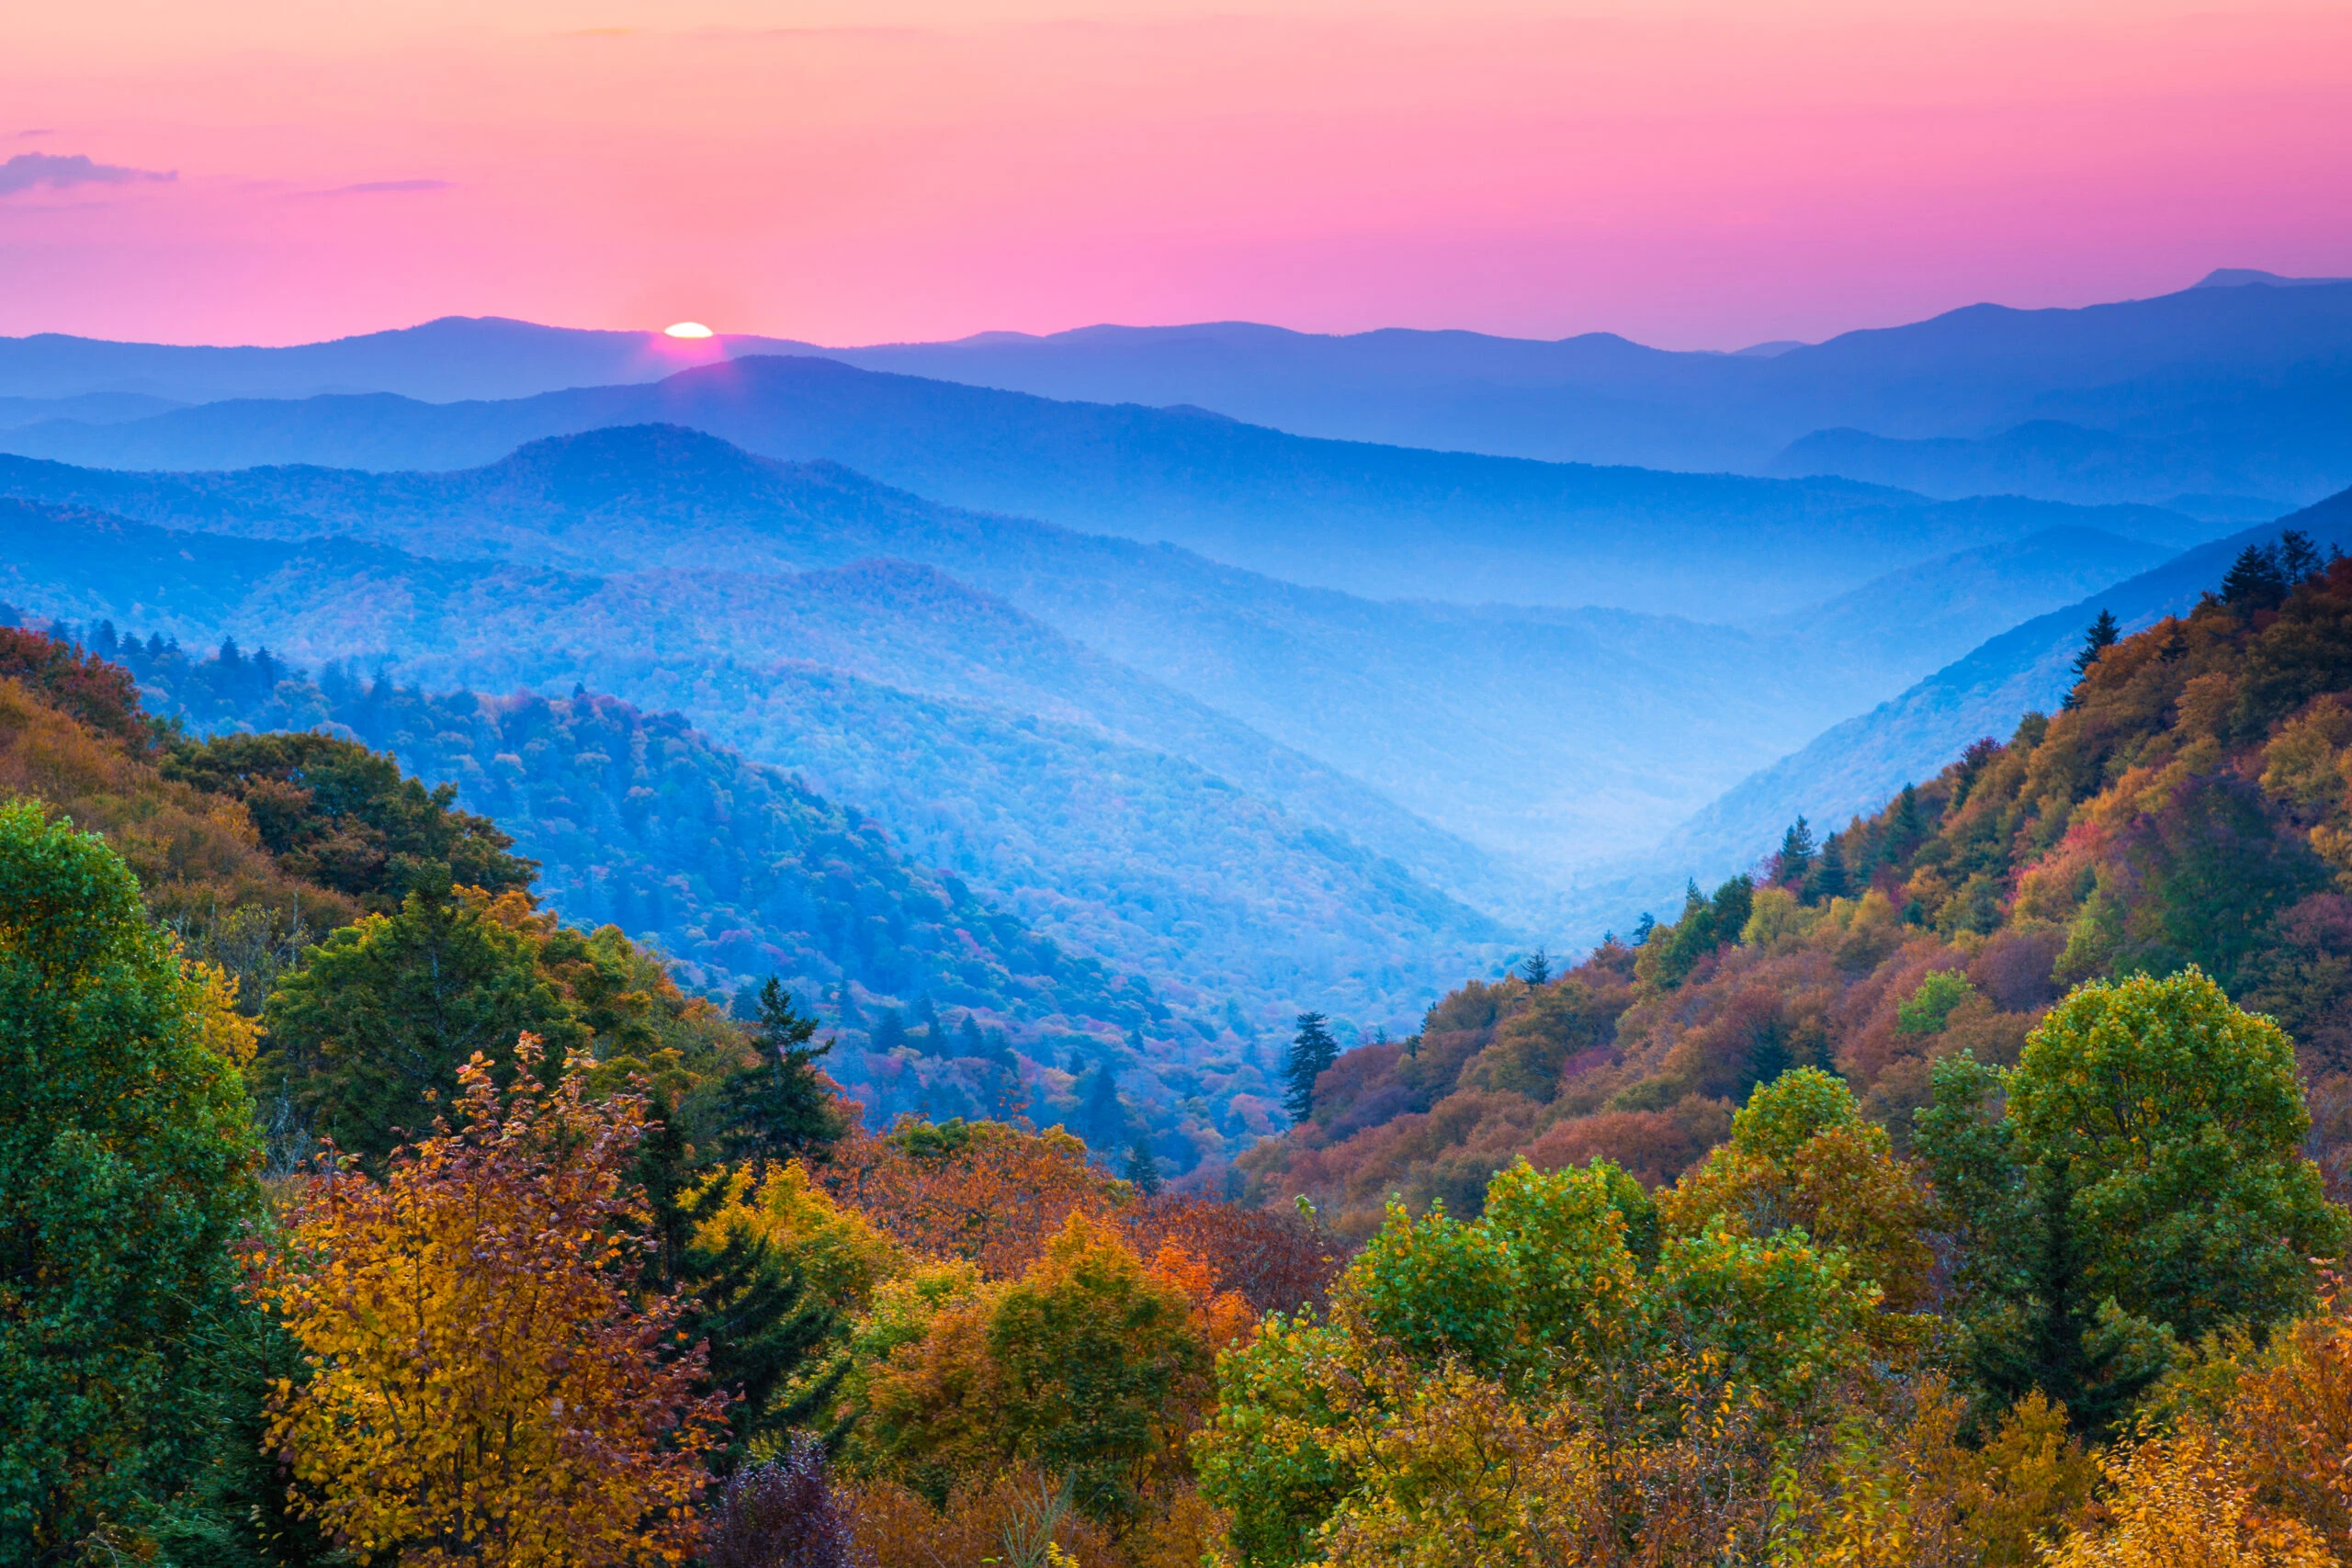 r274-things-to-do-in-great-smoky-mountains-national-park-scaled-16997647112394.jpg